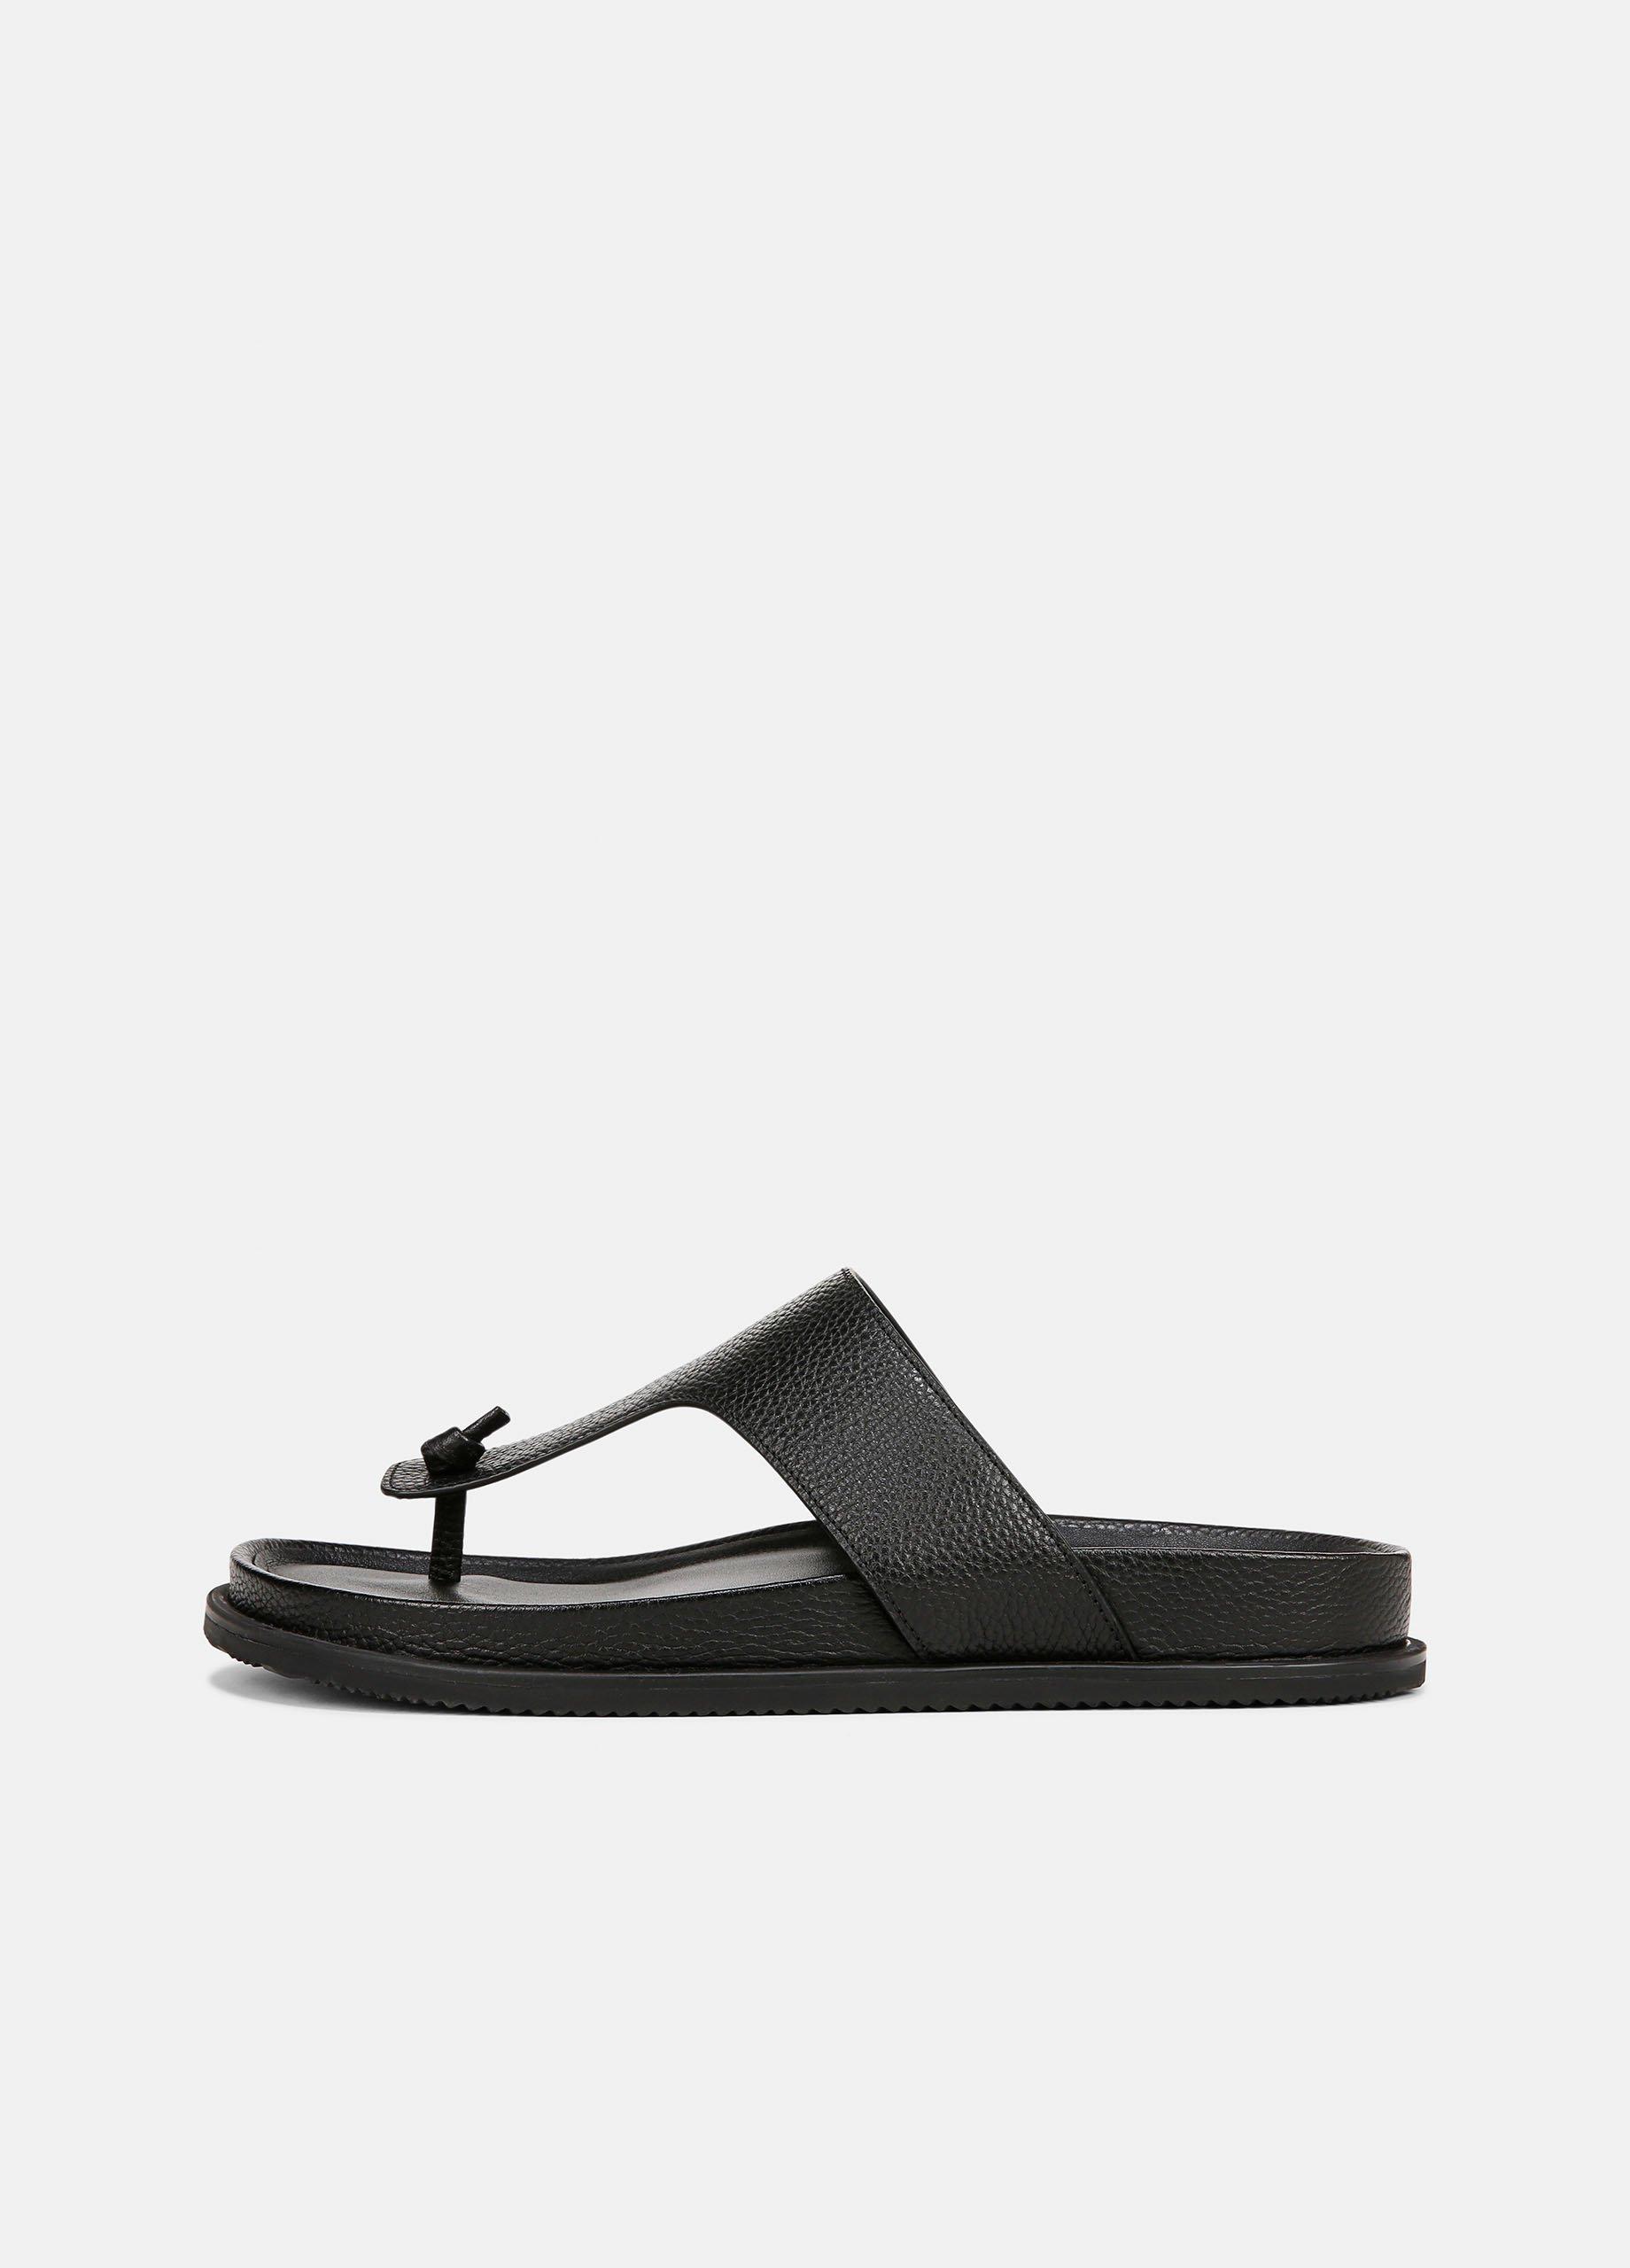 Diego Leather Thong Sandal, Black, Size 10 Vince